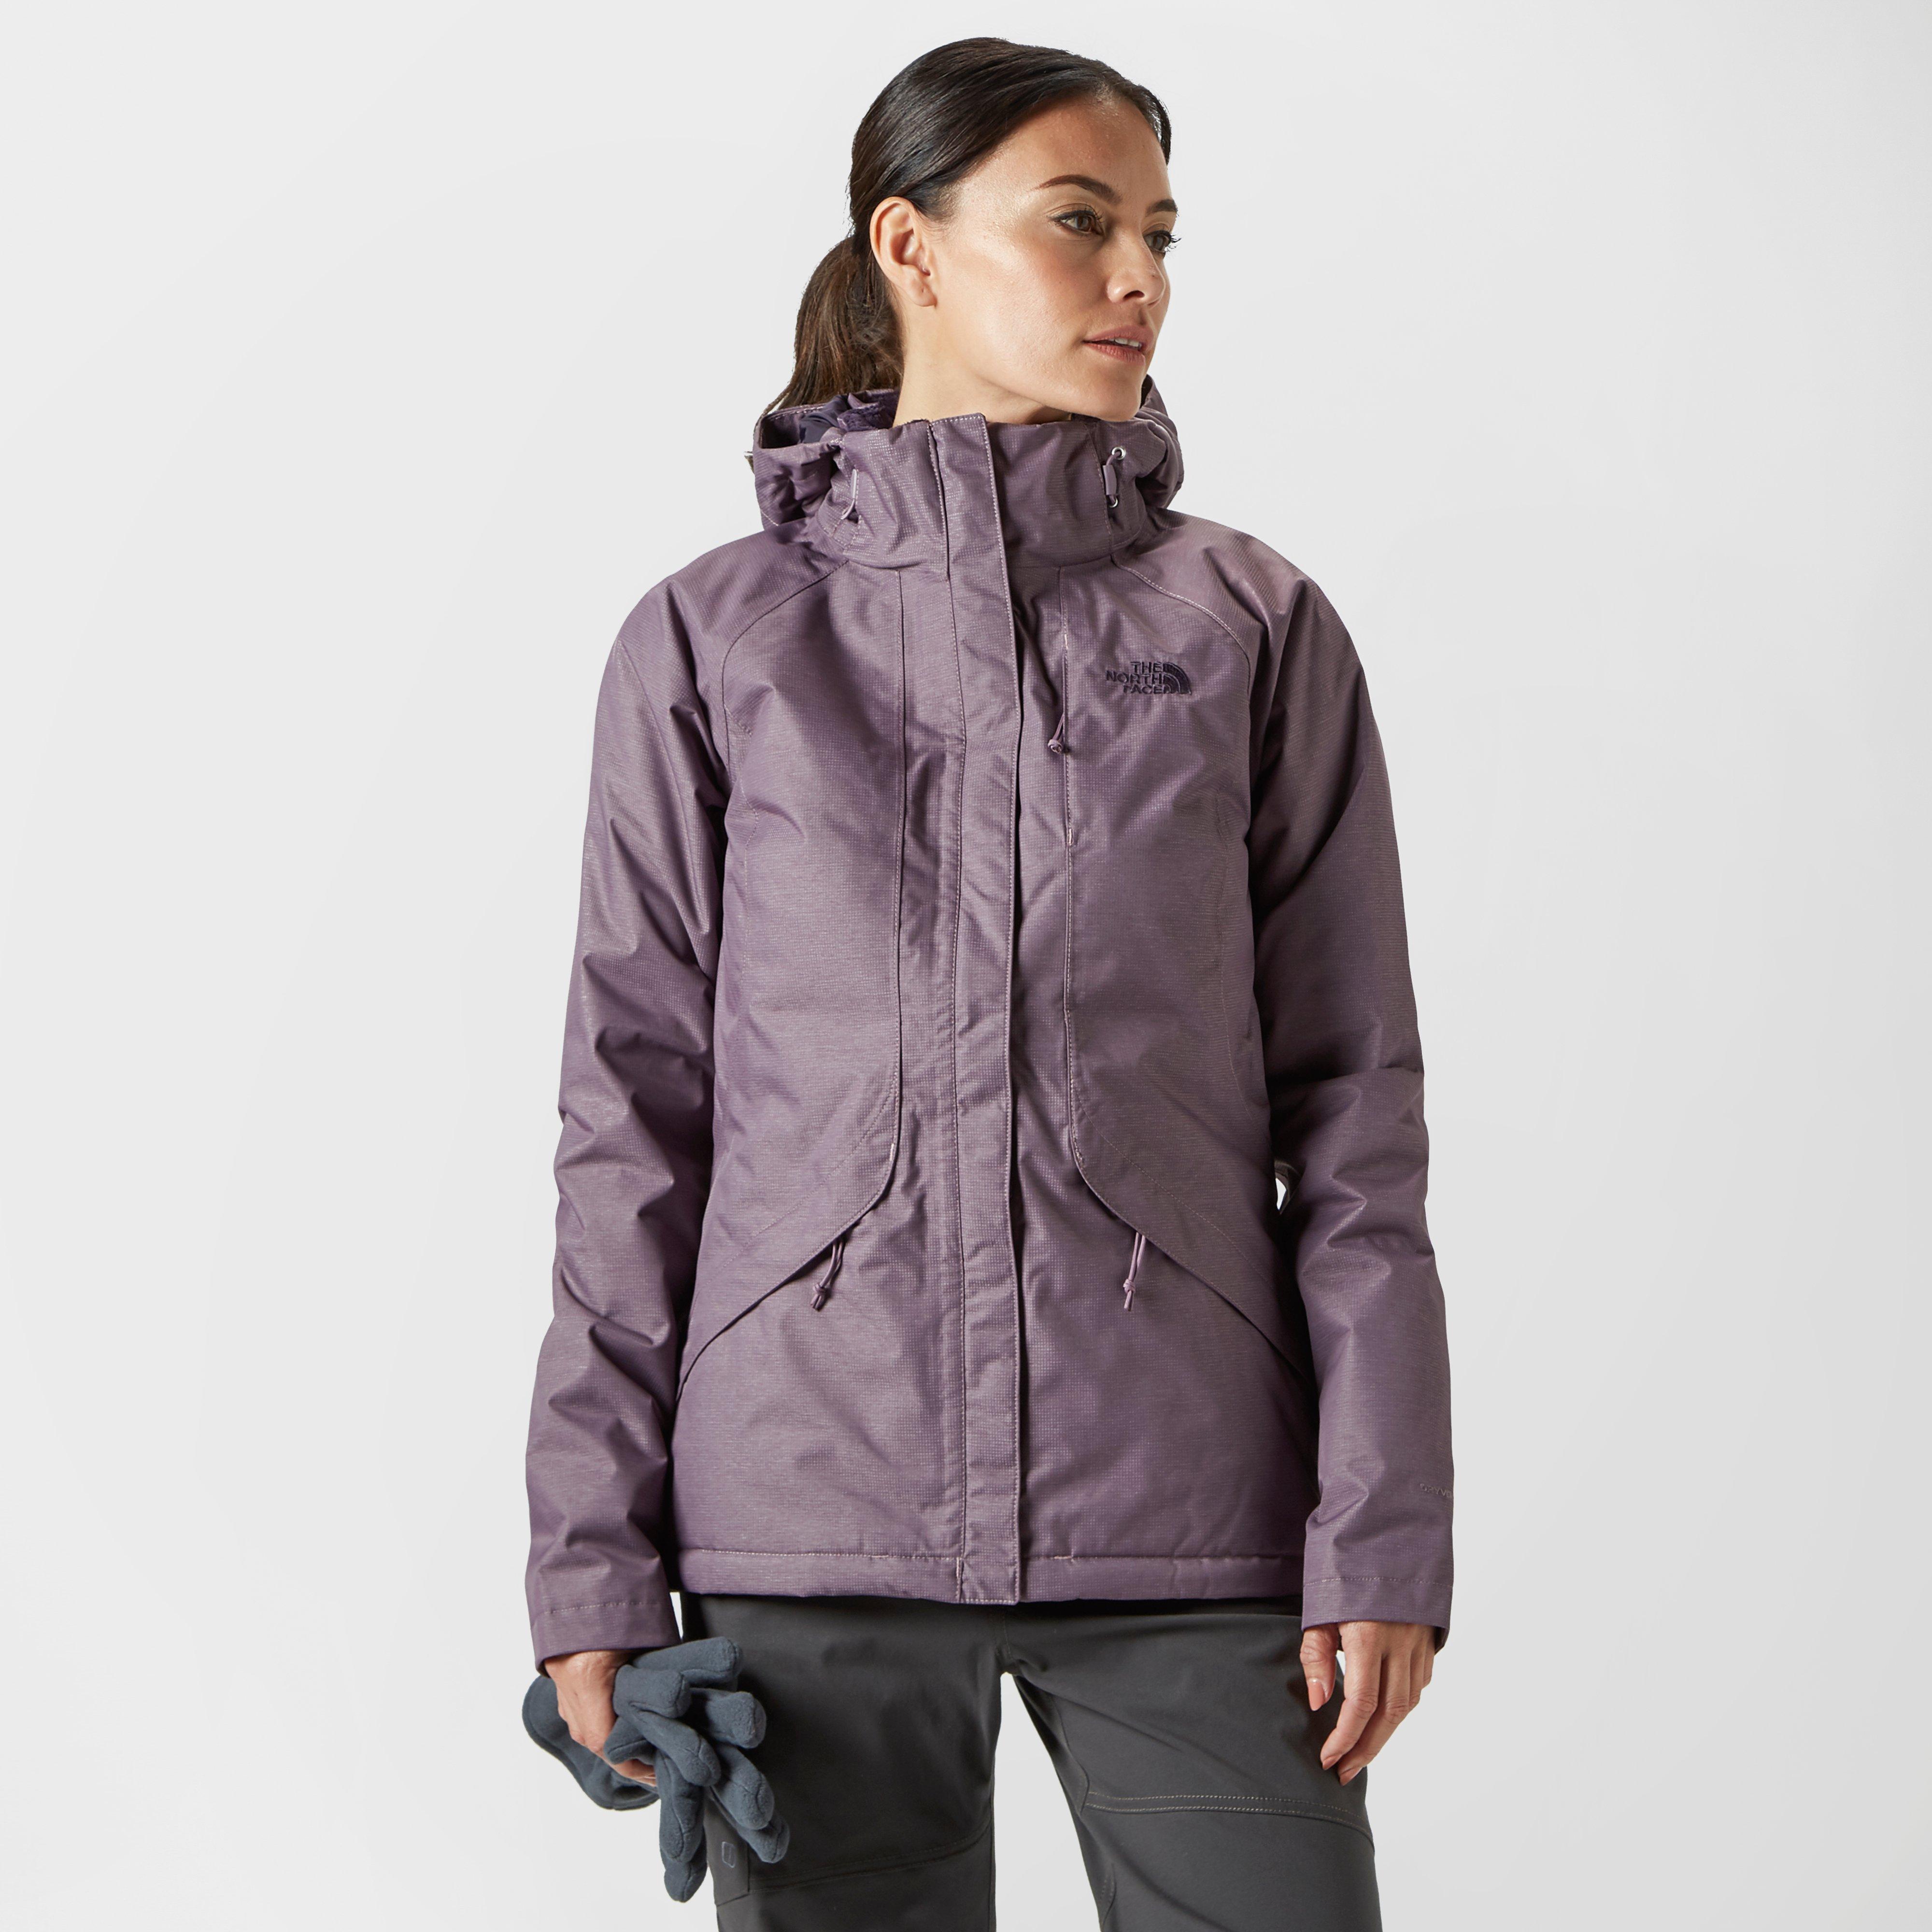 the north face women's inlux 2.0 insulated jacket